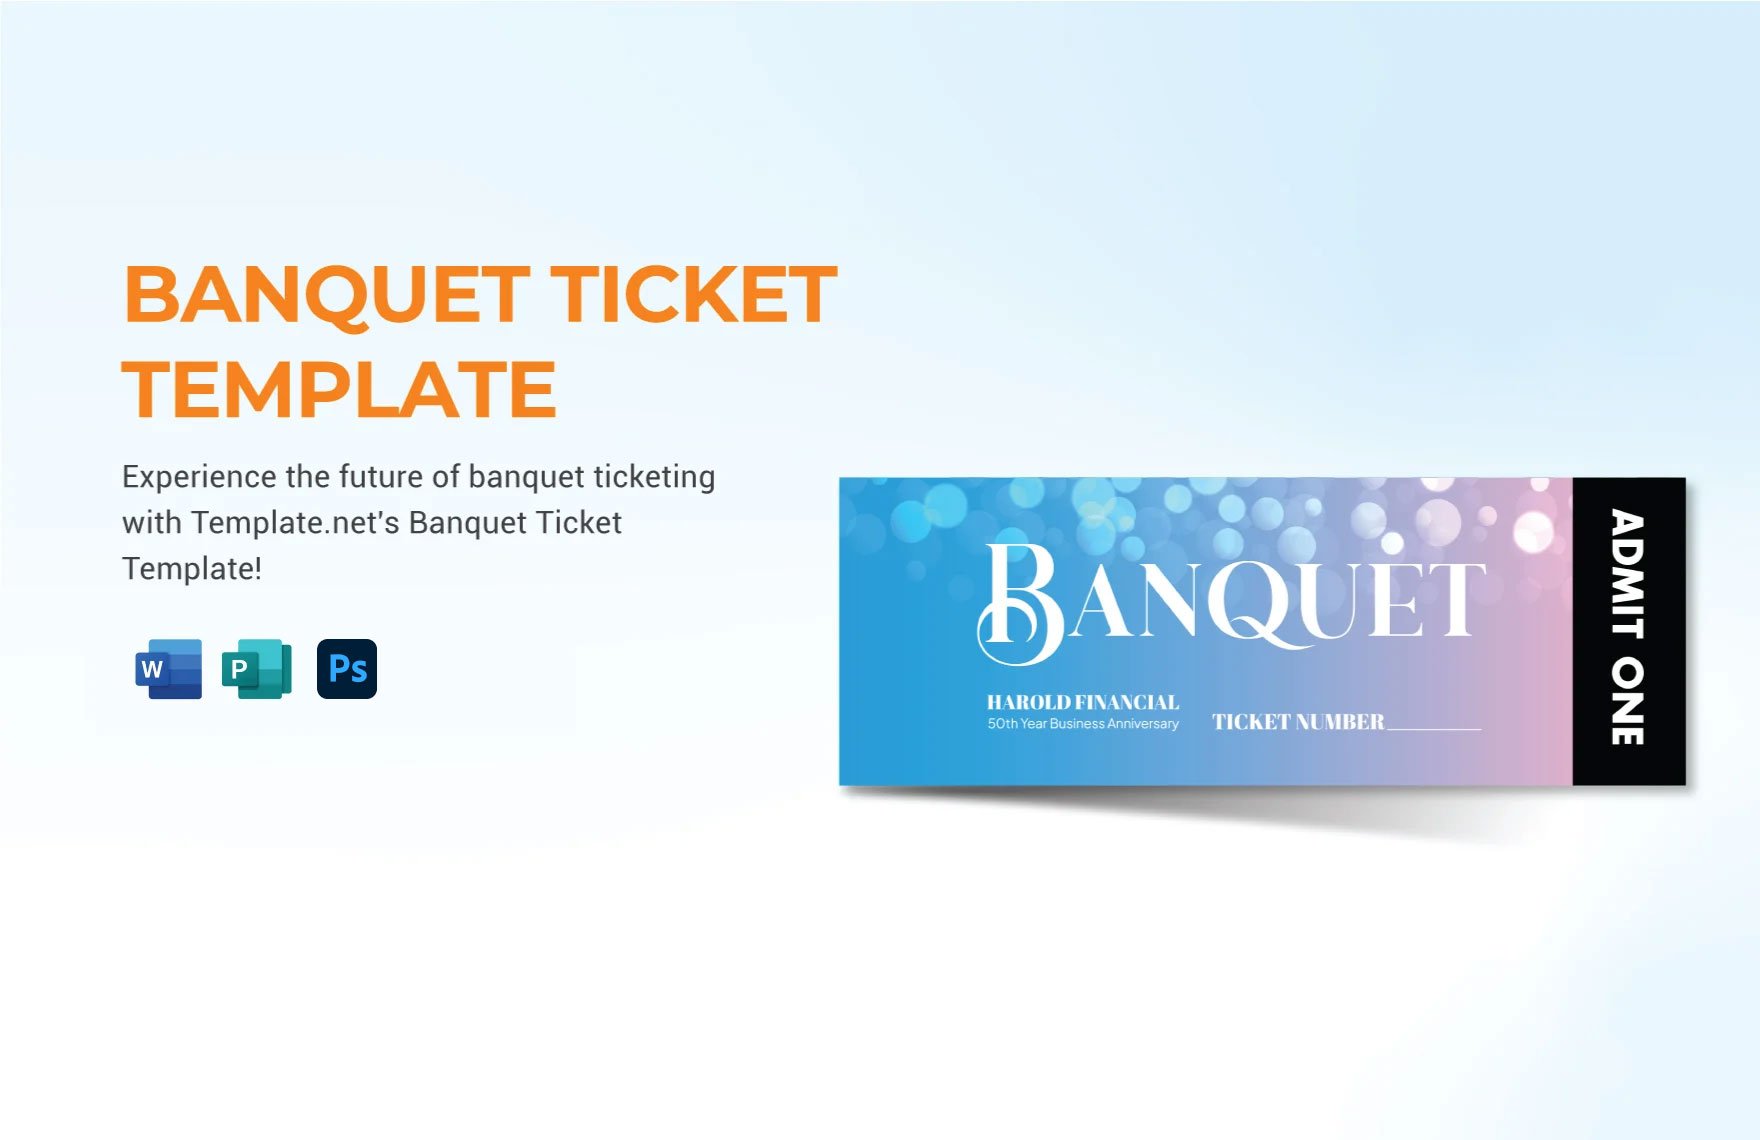 Banquet Ticket Template in Word, PSD, Apple Pages, Publisher